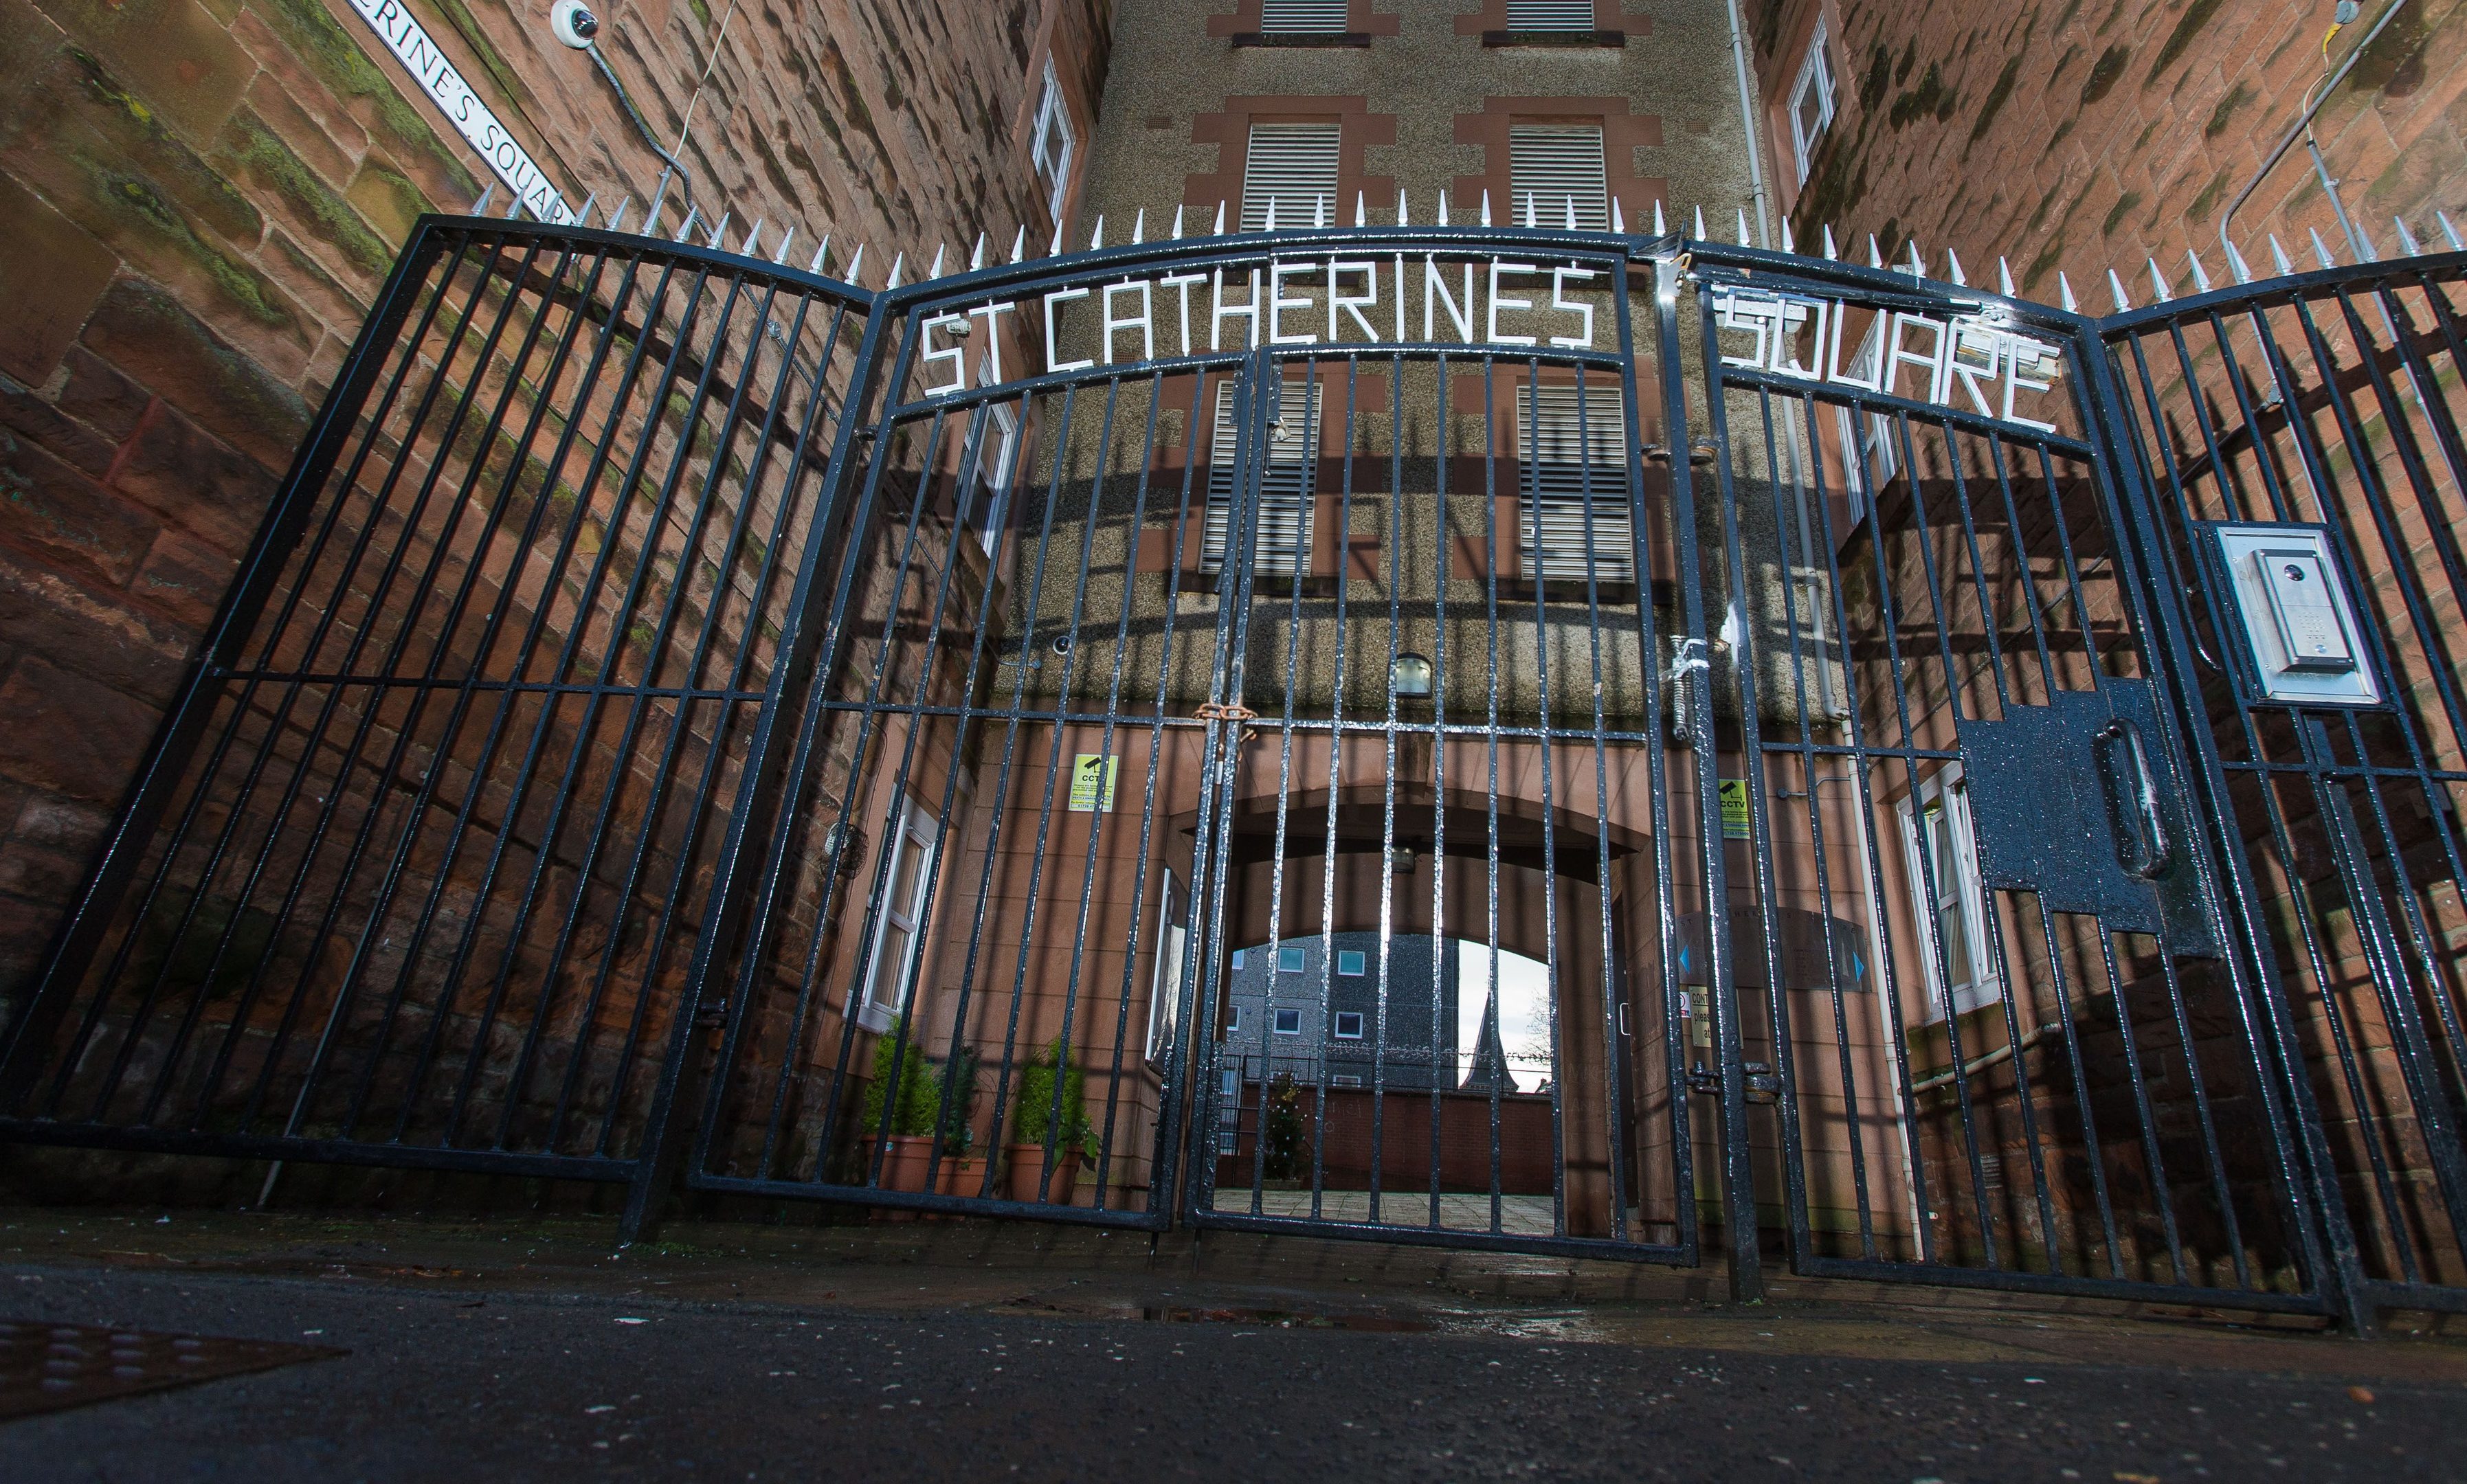 The entrance to St Catherines Square, Perth.